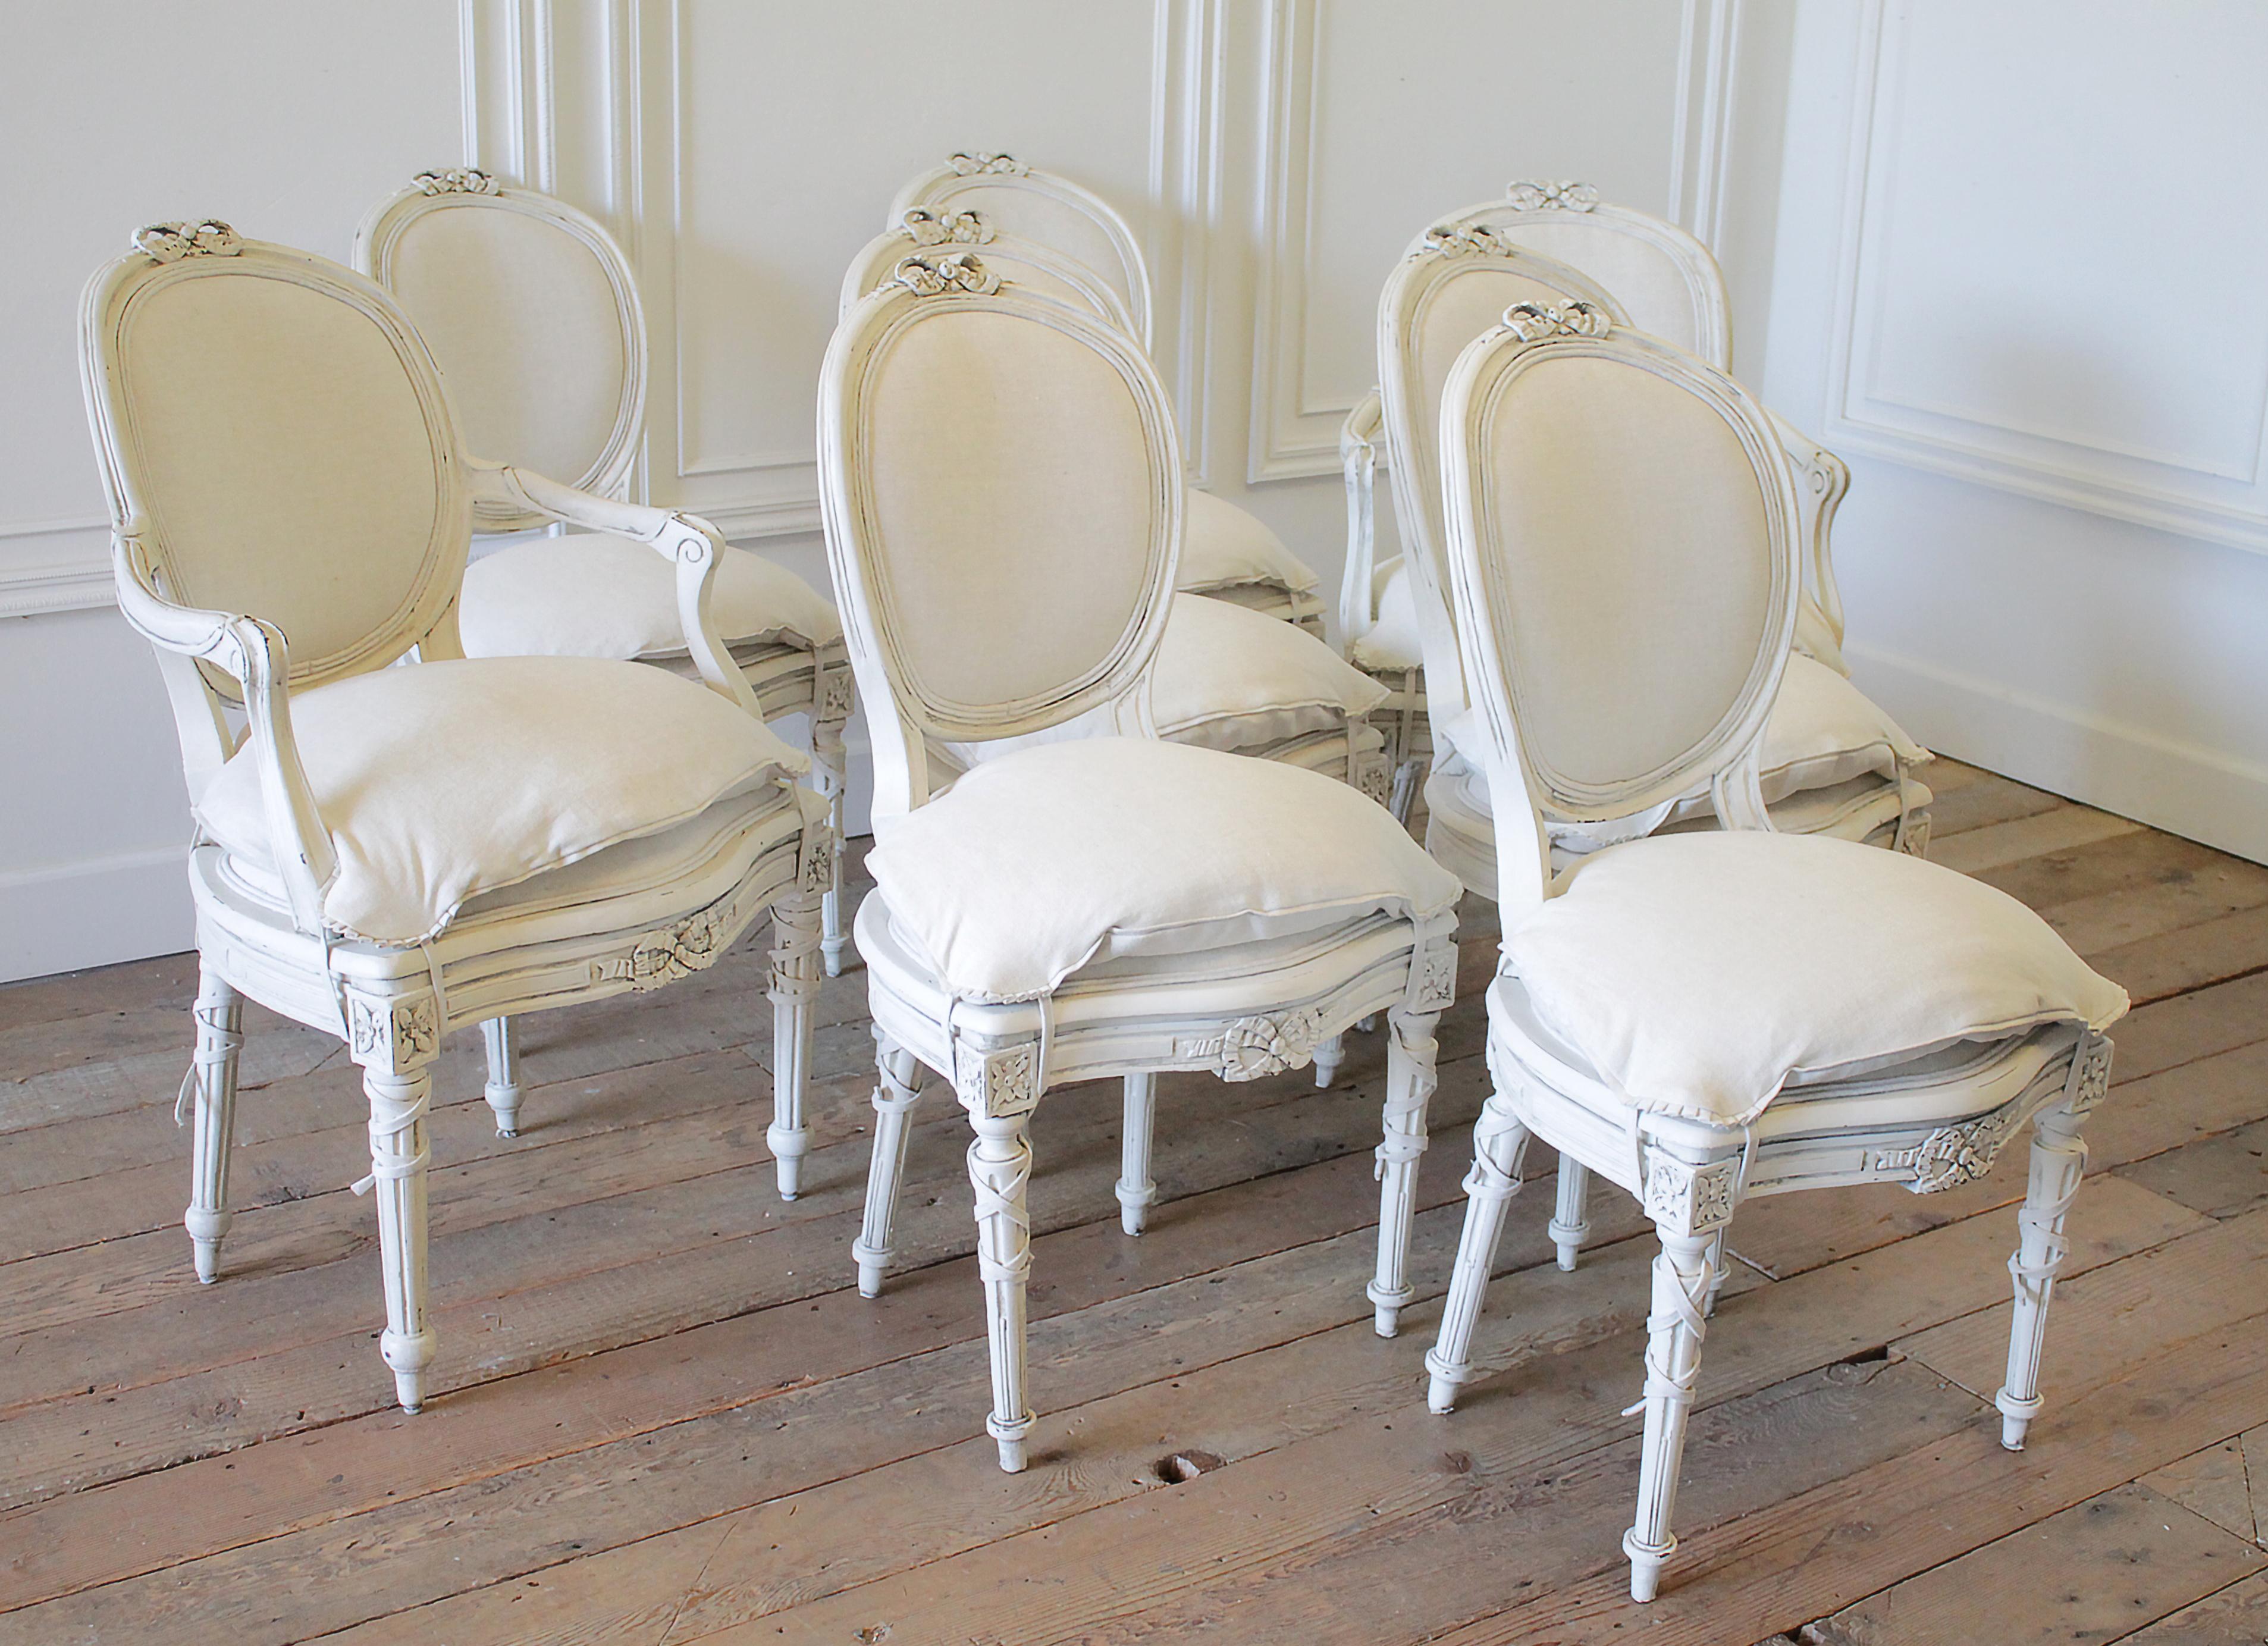 Set of 8 antique Louis XVI style painted and upholstered dining chairs with slip covered seat cushions. Beautiful carved ribbons, and fluted legs. We have painted these in a soft oyster white finish, with subtle distressed edges, and finished with